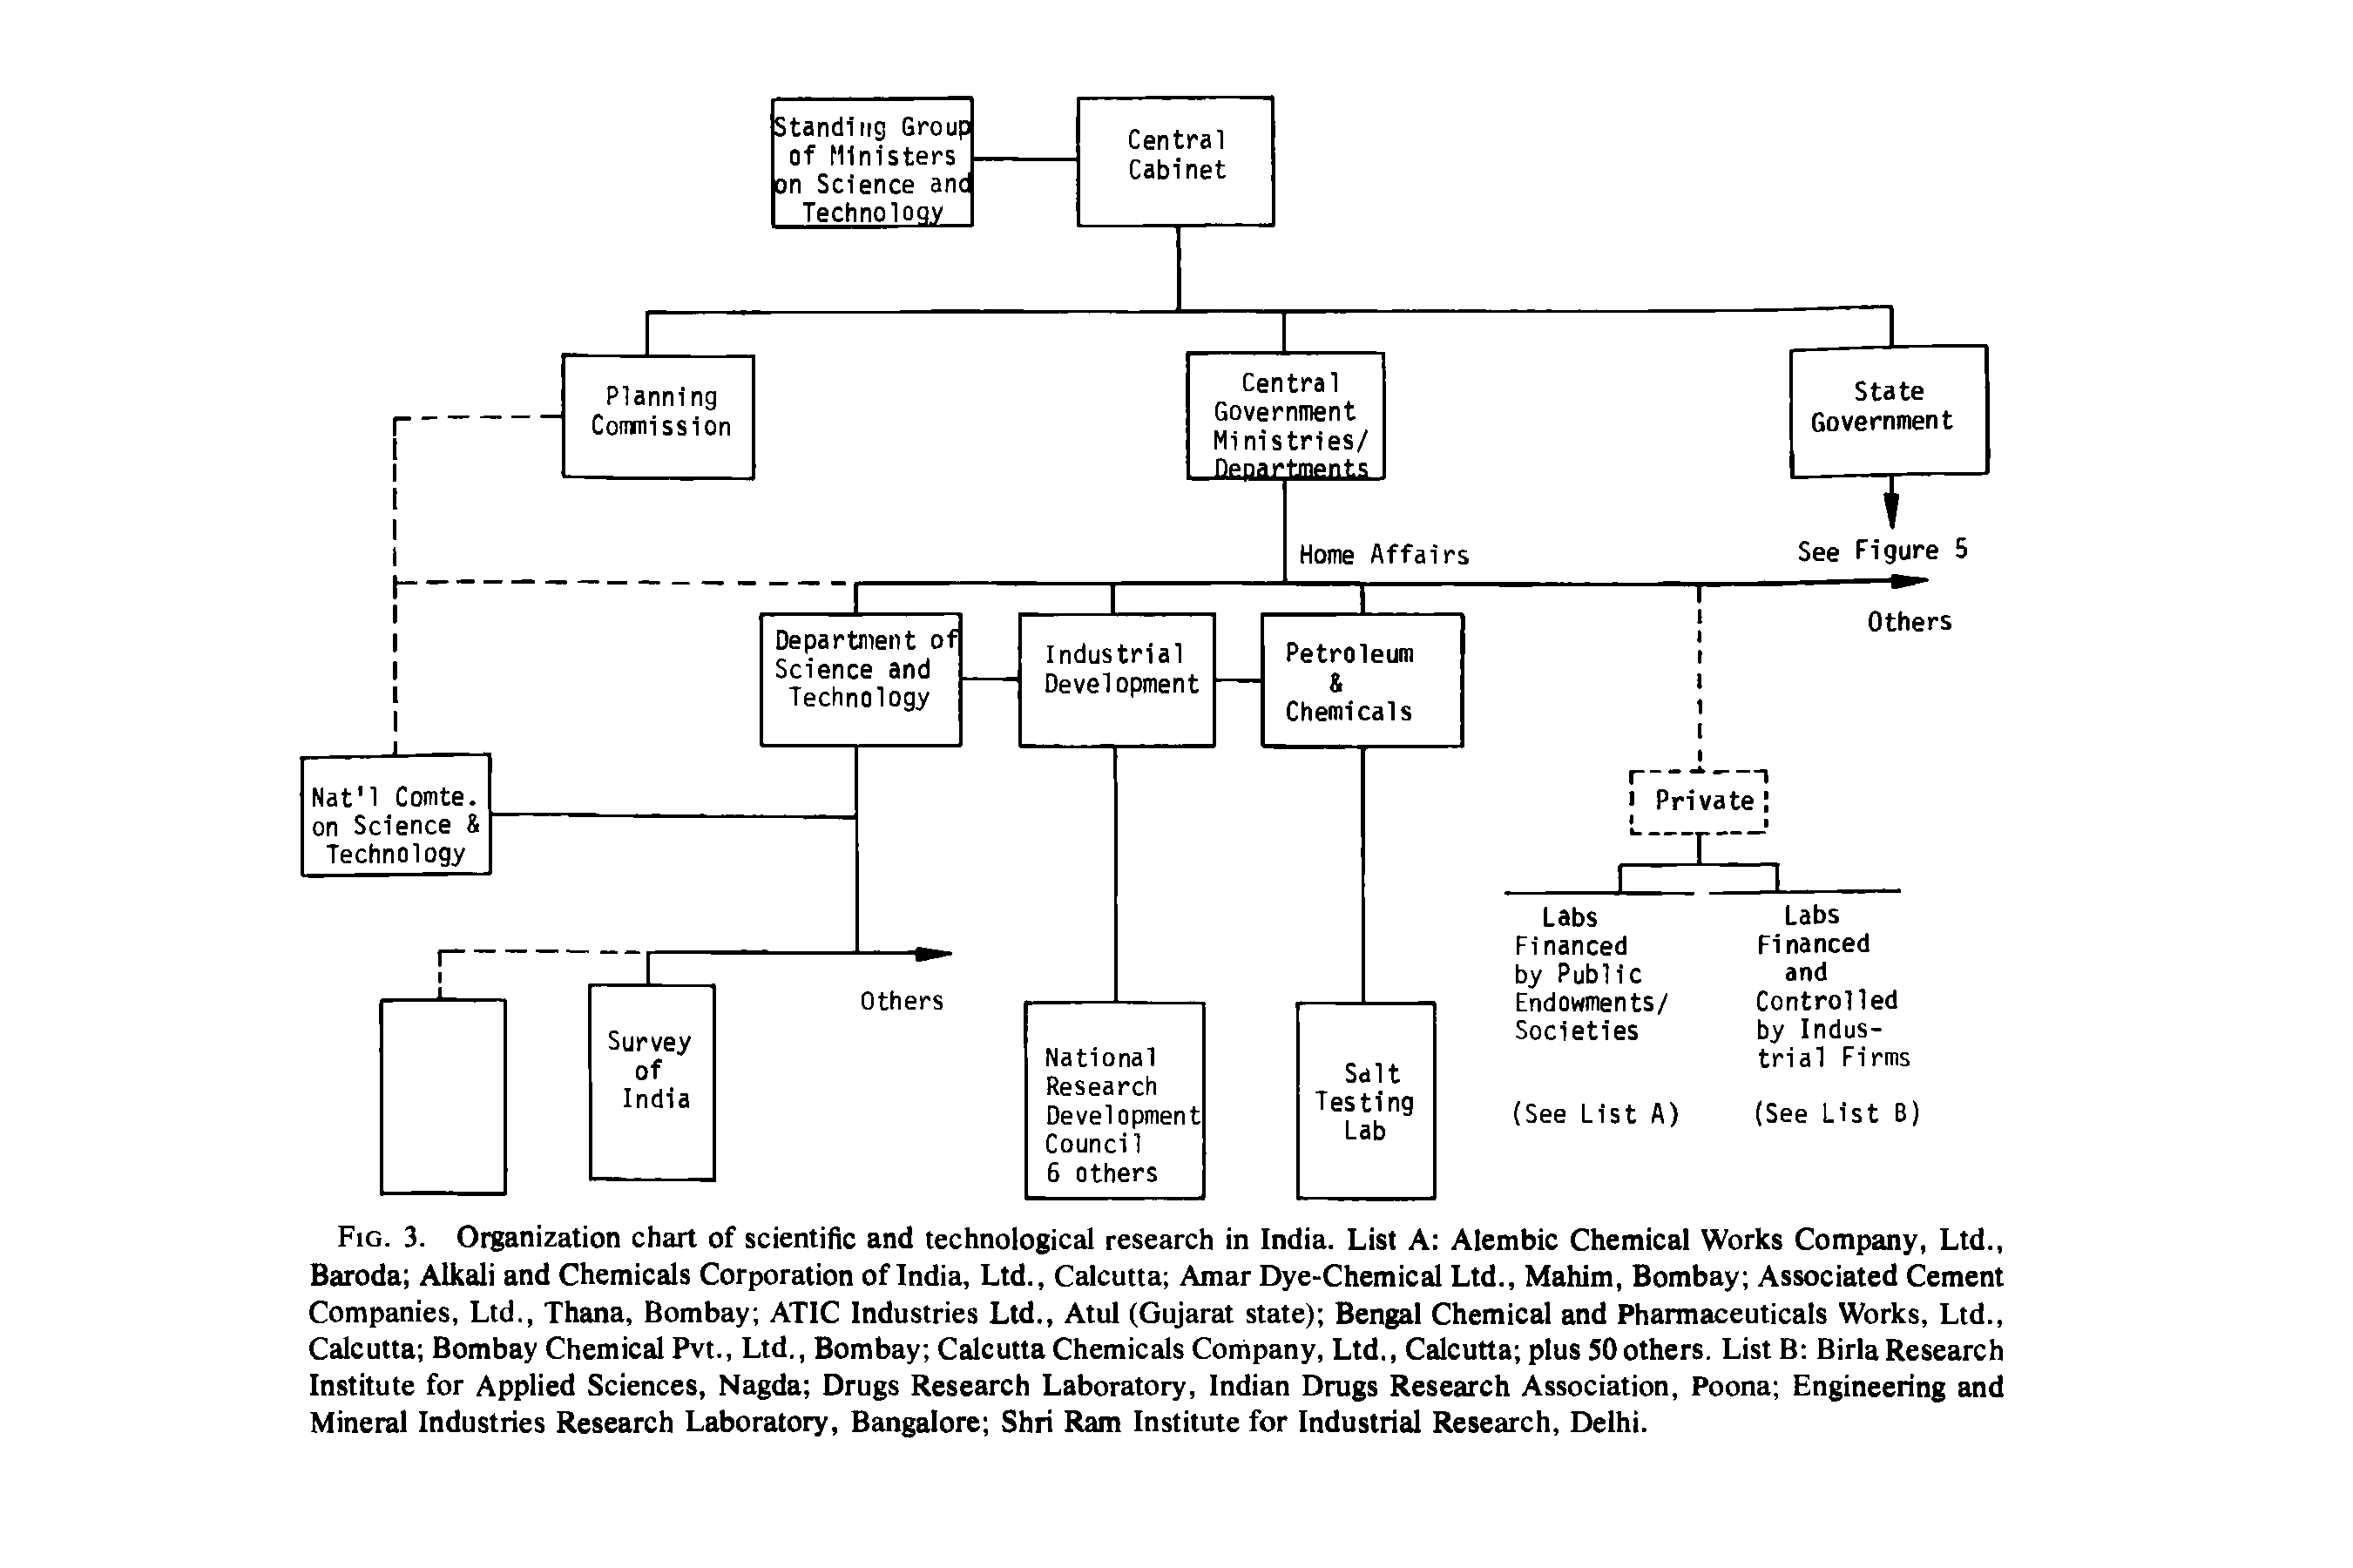 Fig. 3. Organization chart of scientific and technological research in India. List A Alembic Chemical Works Company, Ltd., Baroda Alkali and Chemicals Corporation of India, Ltd., Calcutta Amar Dye-Chemical Ltd., Mahim, Bombay Associated Cement Companies, Ltd., Thana, Bombay ATIC Industries Ltd., AtuI (Gujarat state) Bengal Chemical and Pharmaceuticals Works, Ltd., Calcutta Bombay Chemical Pvt., Ltd., Bombay Calcutta Chemicals Company, Ltd., Calcutta plus 50 others. List B Birla Research Institute for Applied Sciences, Nagda Drugs Research Laboratory, Indian Drugs Research Association, Poona Engineering and Mineral Industries Research Laboratory, Bangalore Shri Ram Institute for Industrial Research, Delhi.